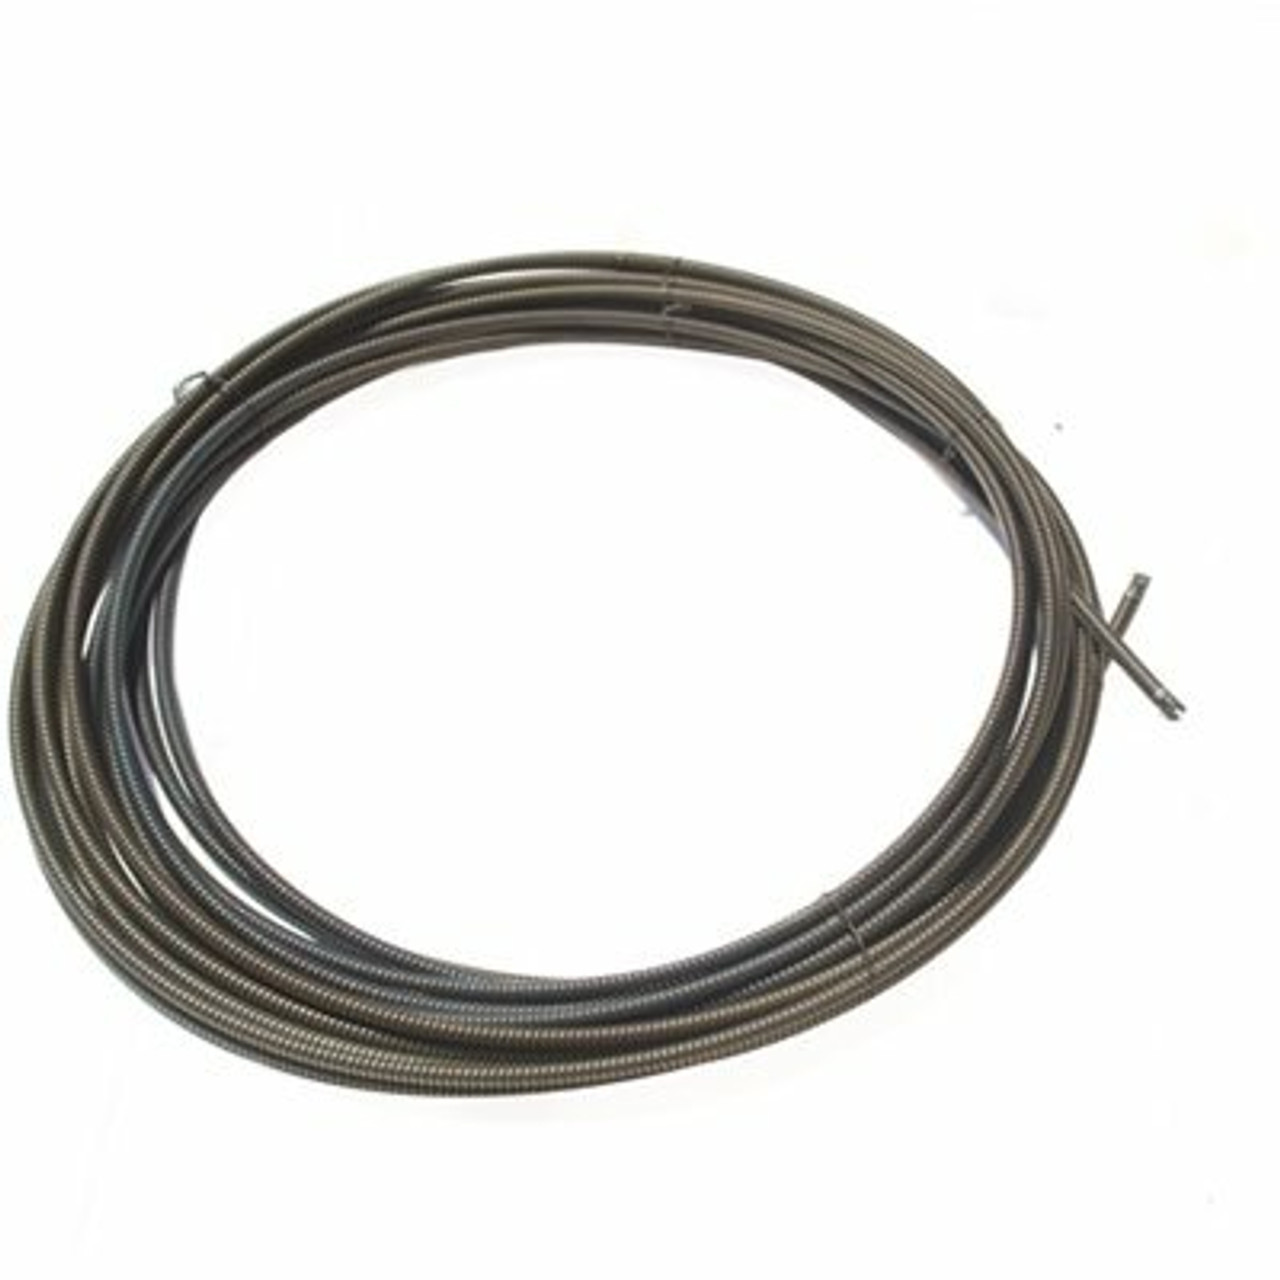 Flexicore Speedrooter Replacement Cable 3/4 In. X 100 Ft., With Male And Female Connectors